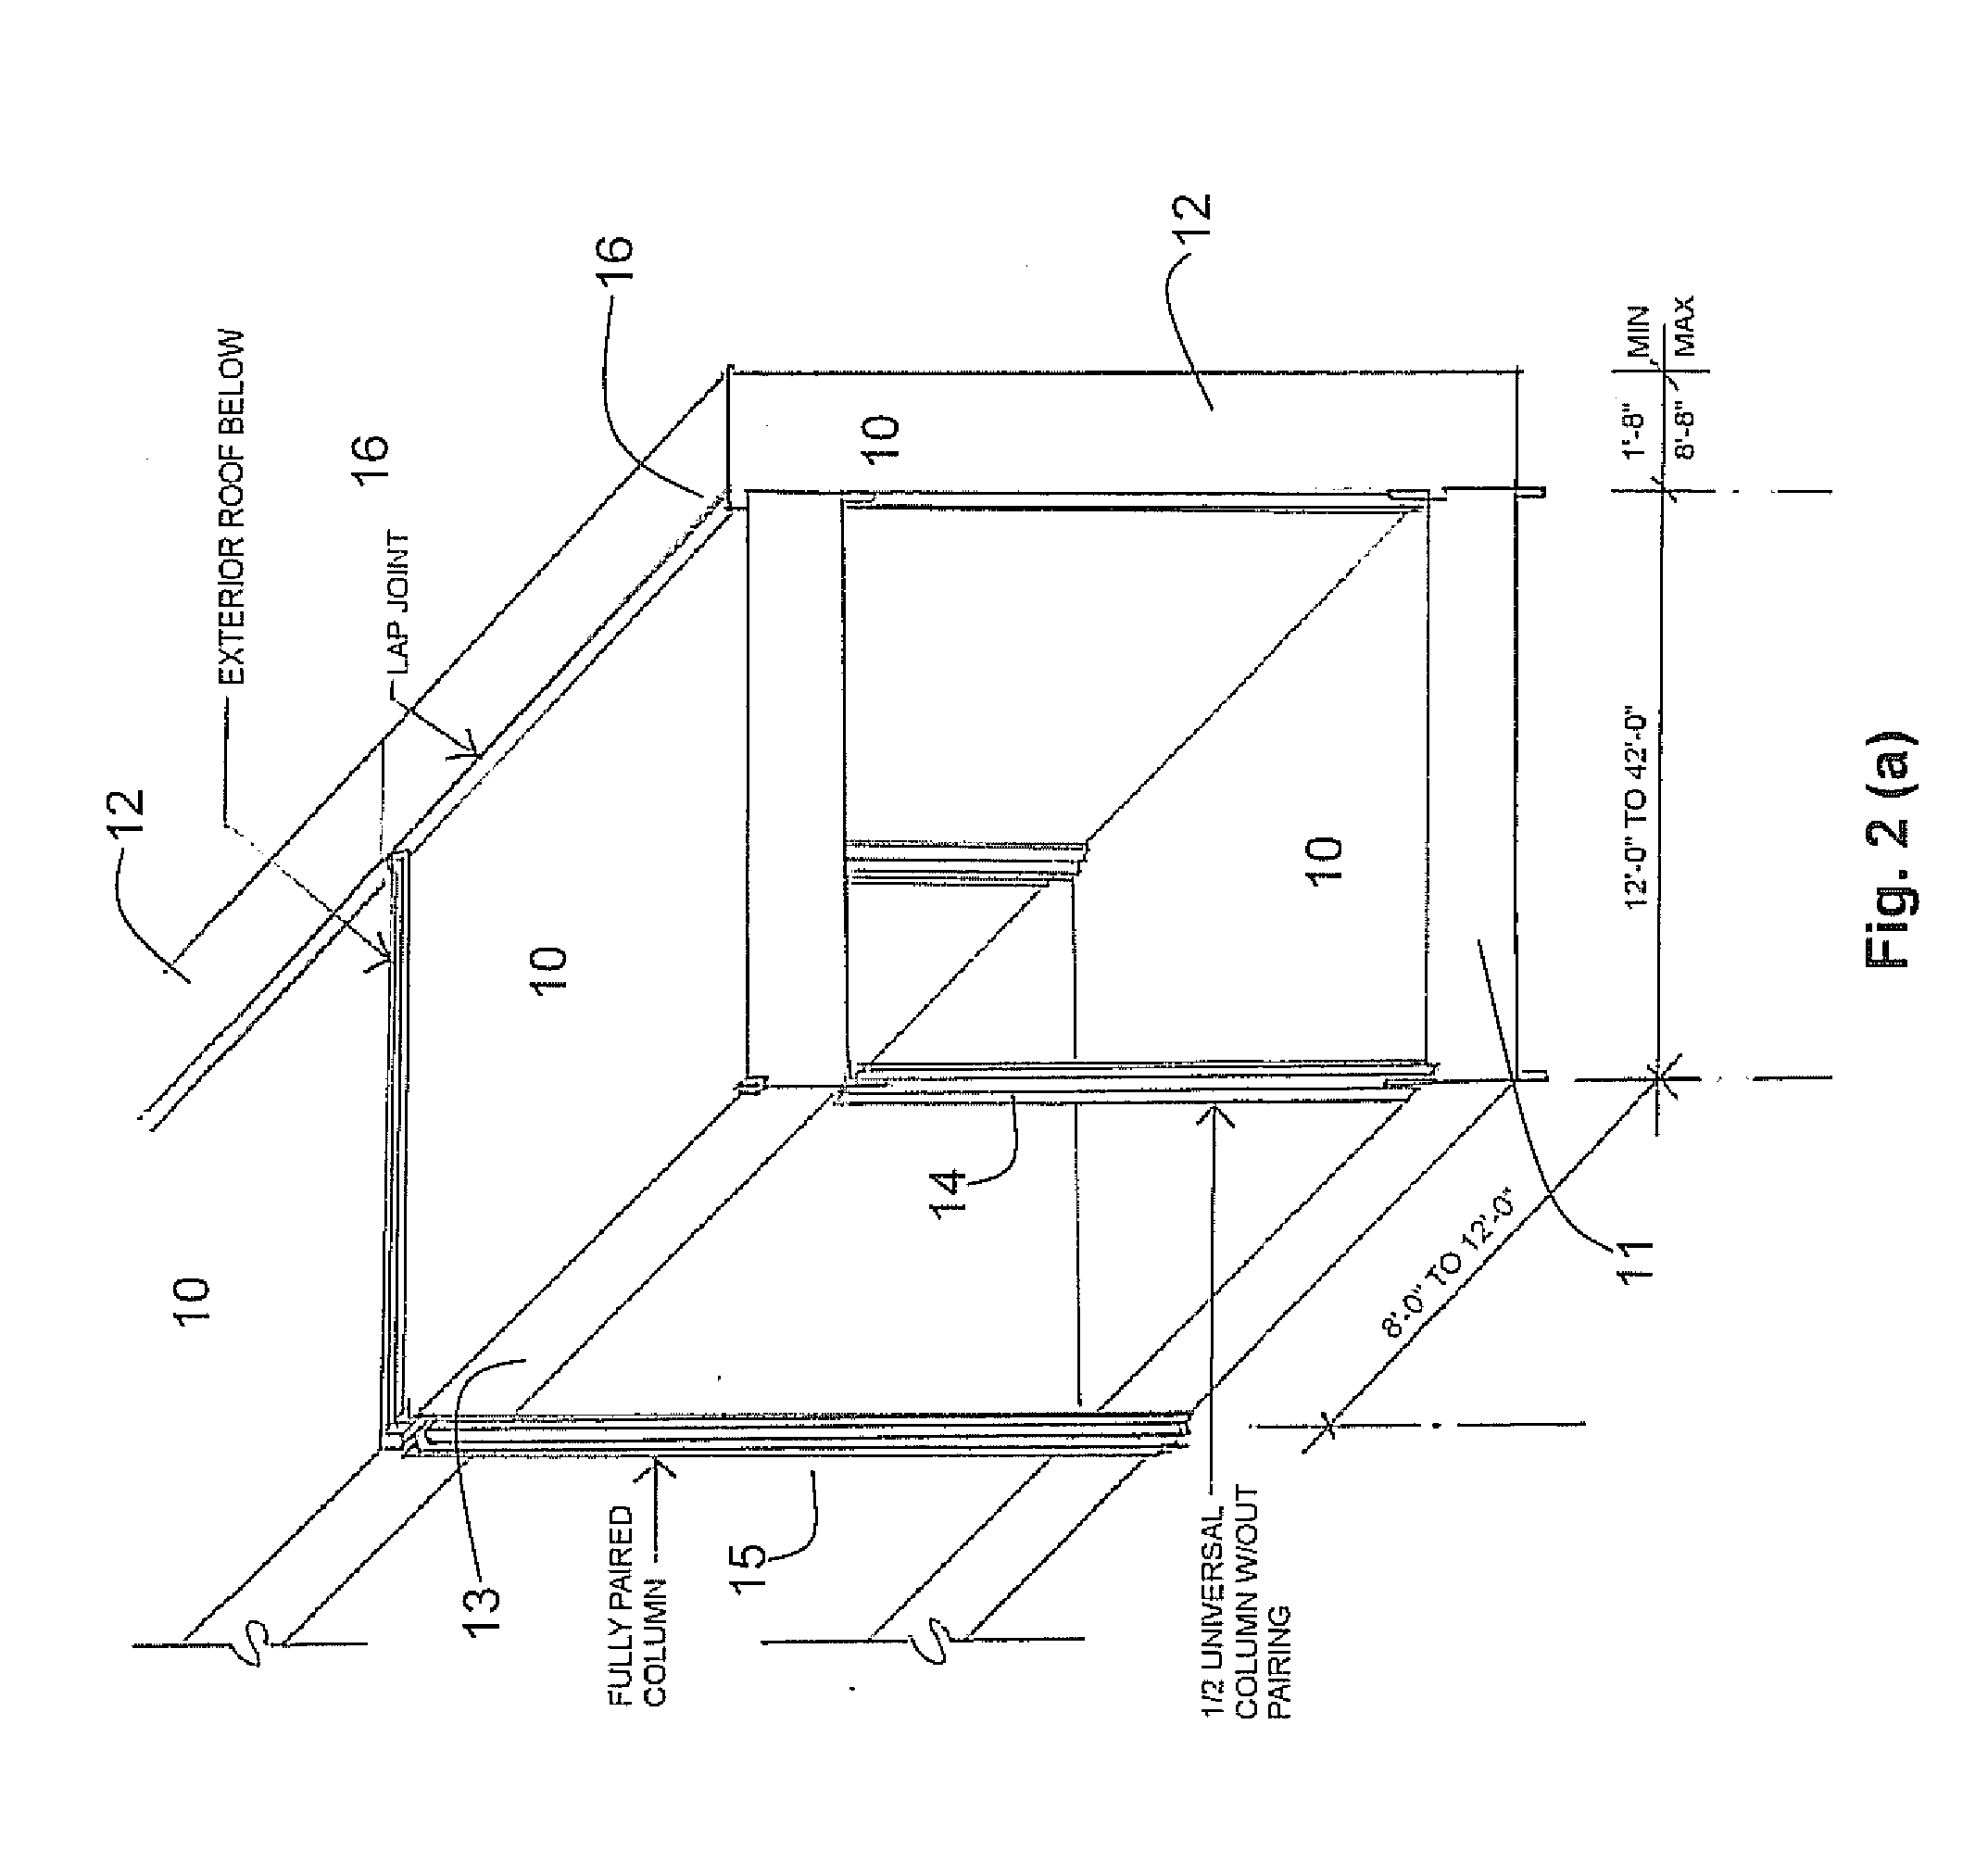 Method and apparatus for designing, producing, manufacturing and delivering personalized living environments